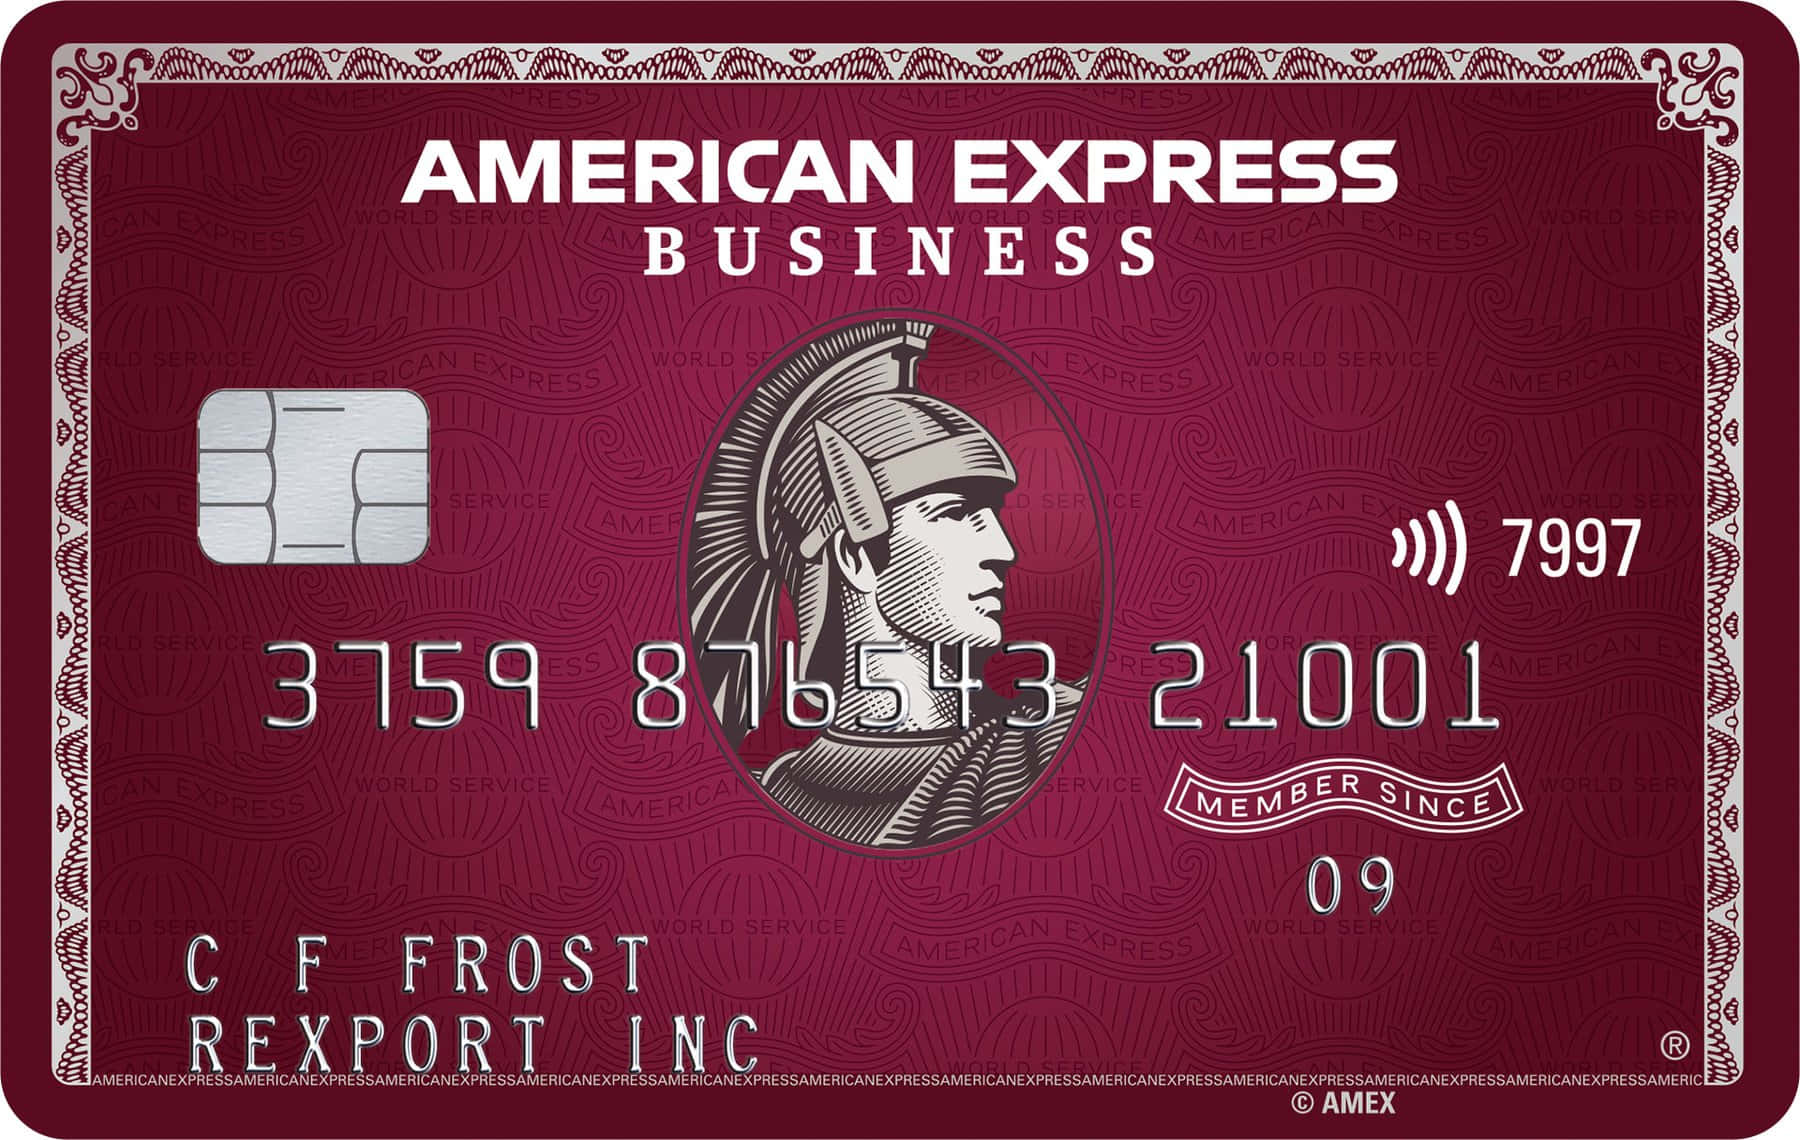 Reward yourself with American Express